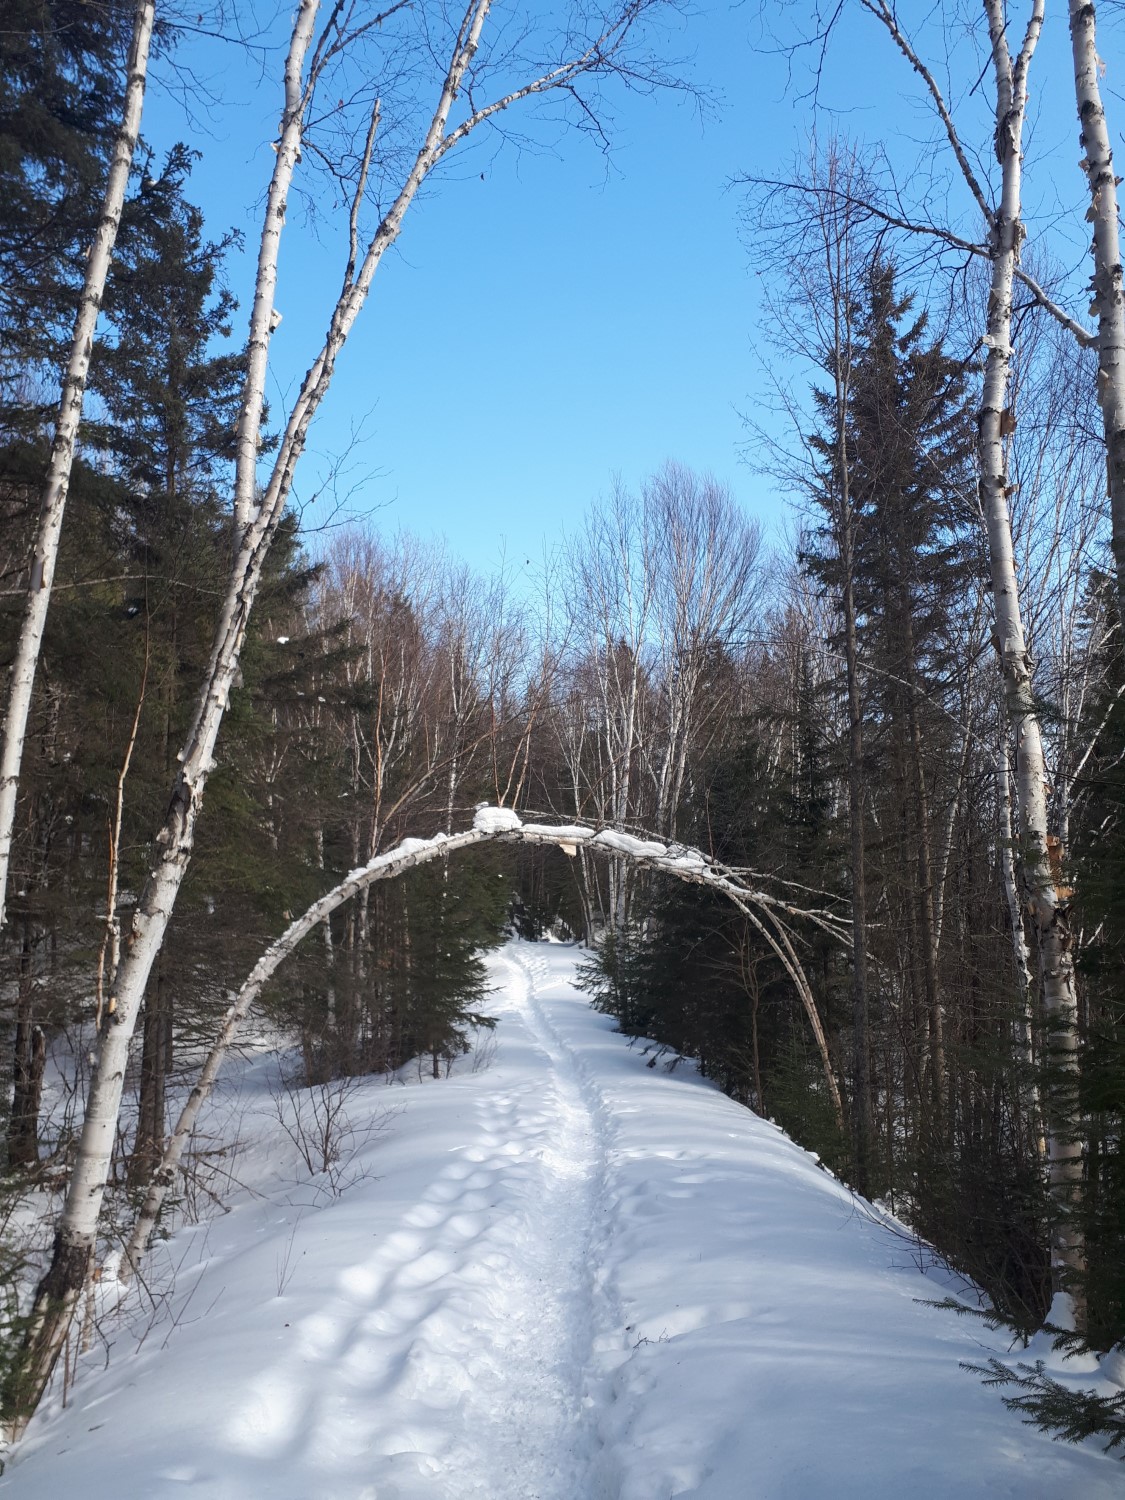 A snowy trail through a forest with a birch tree bent over the trail